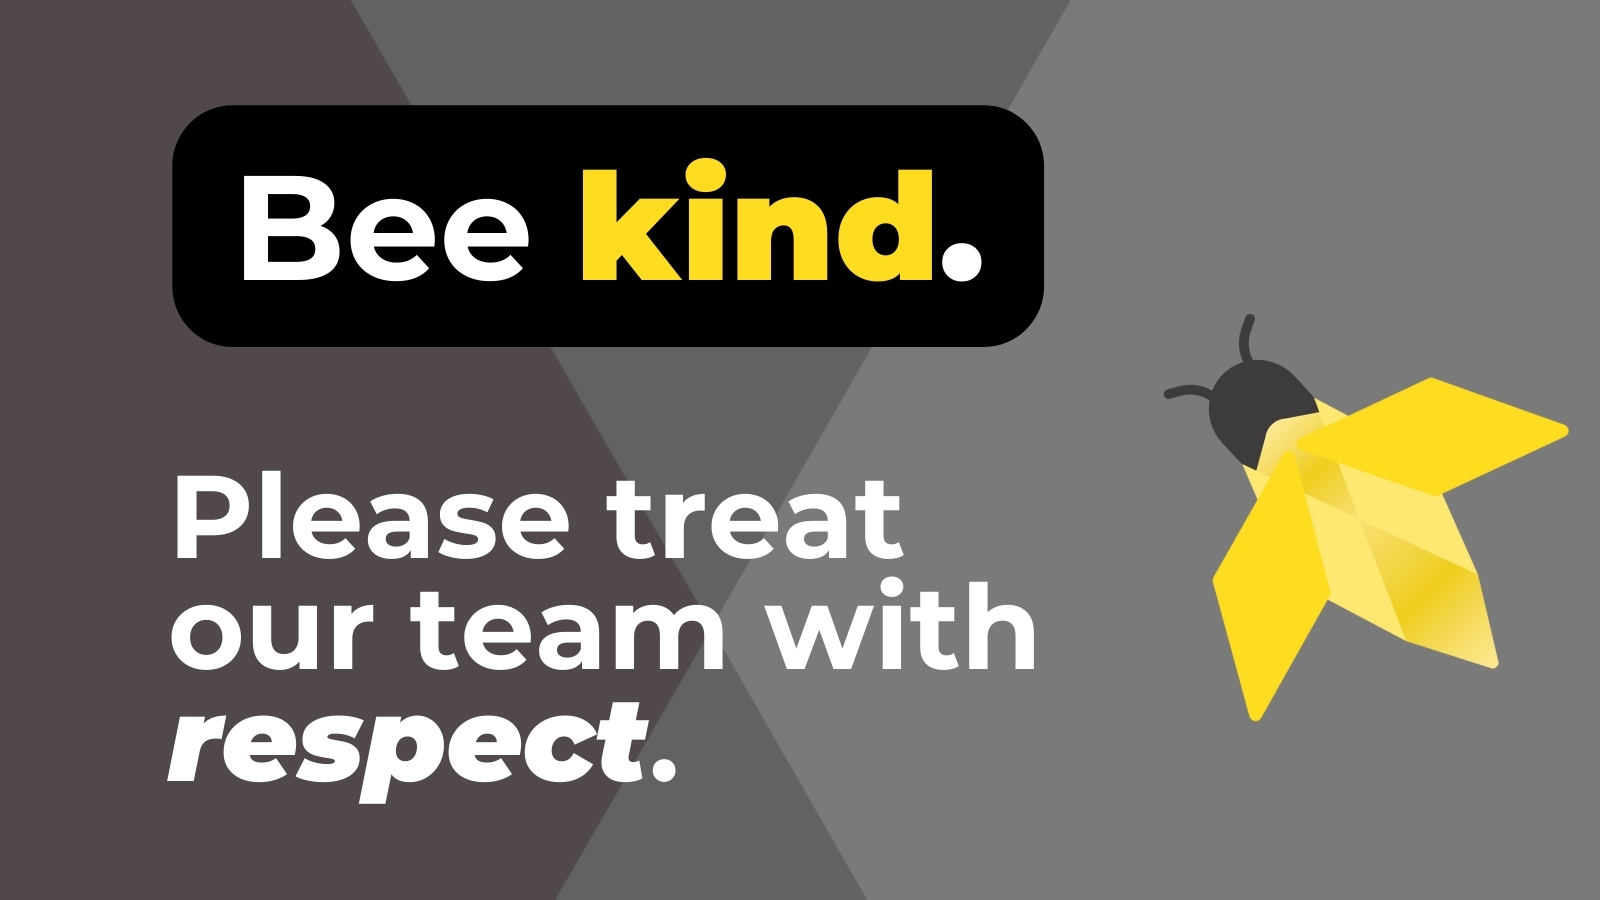 Bee kind. Please treat our team with respect.